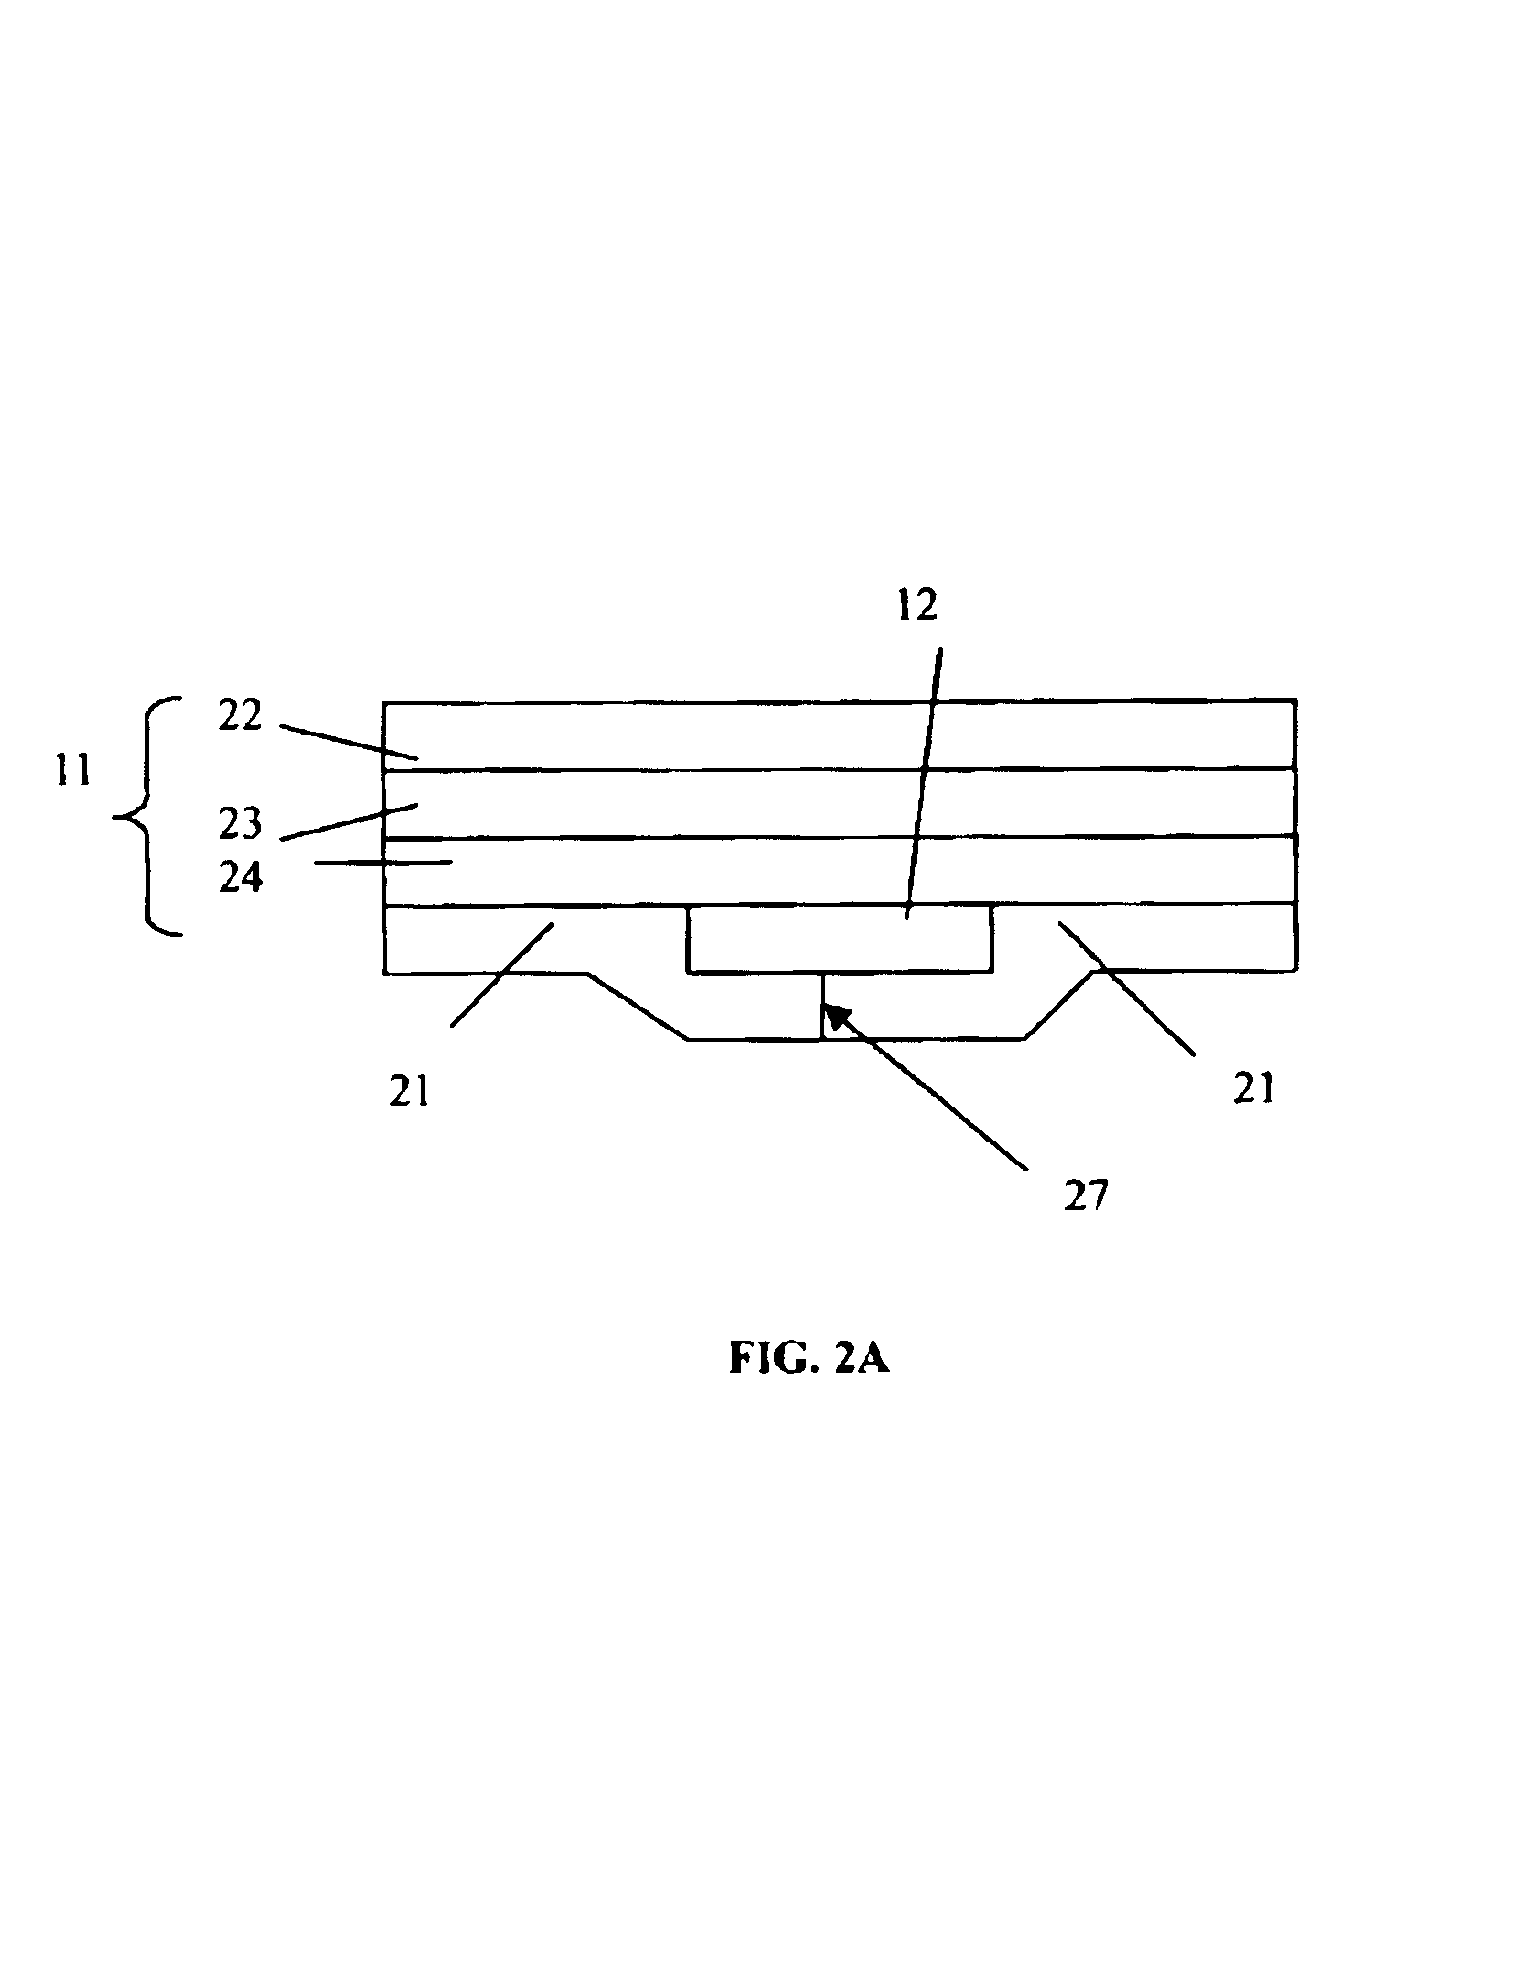 Combination closure and tear tape, packaging materials containing it, and method of using it to seal and later open packages